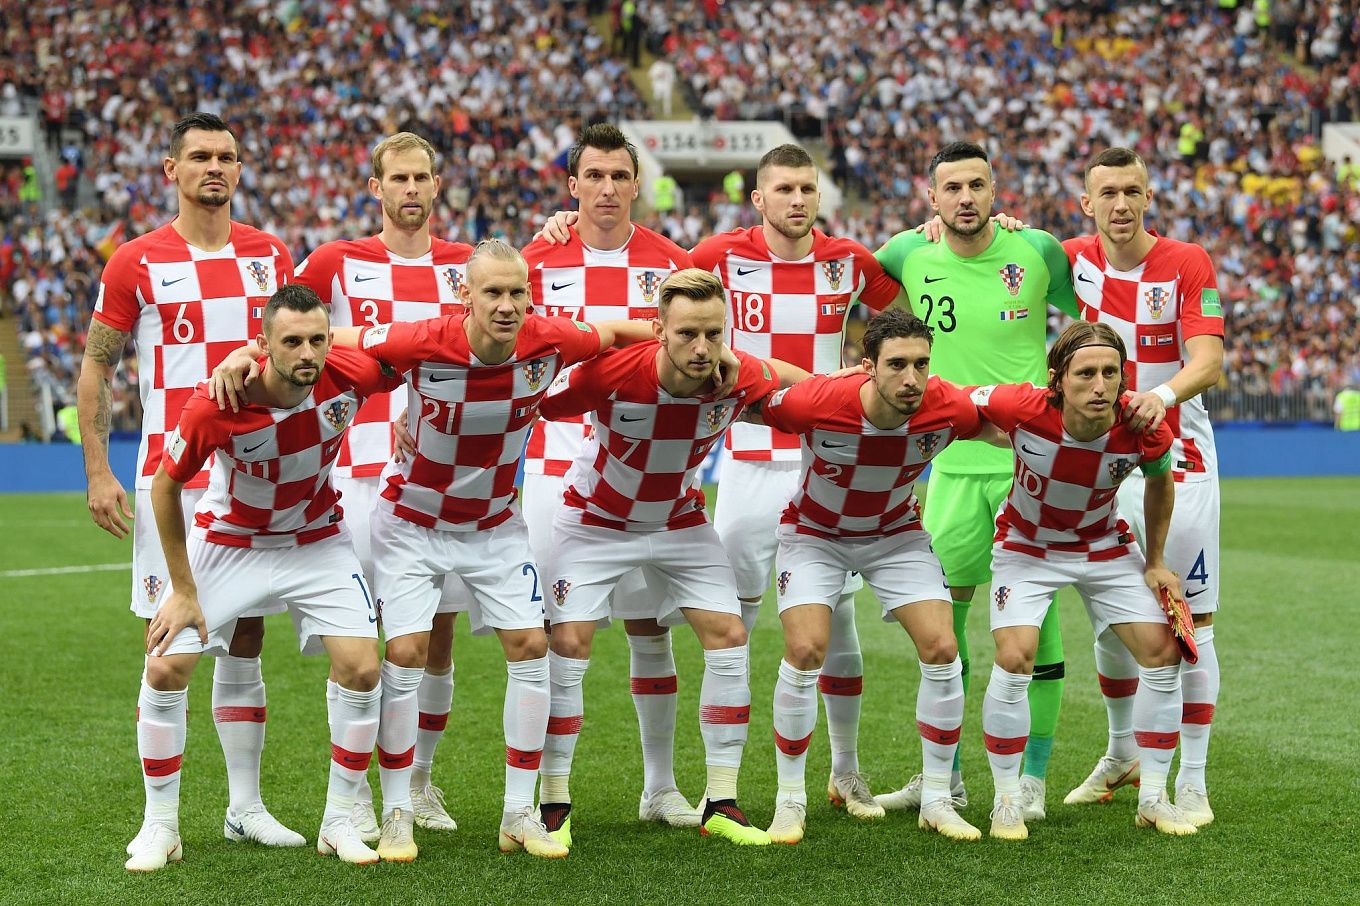 Croatia at the Qatar World Cup 2022: Group, Schedule of Matches, Star